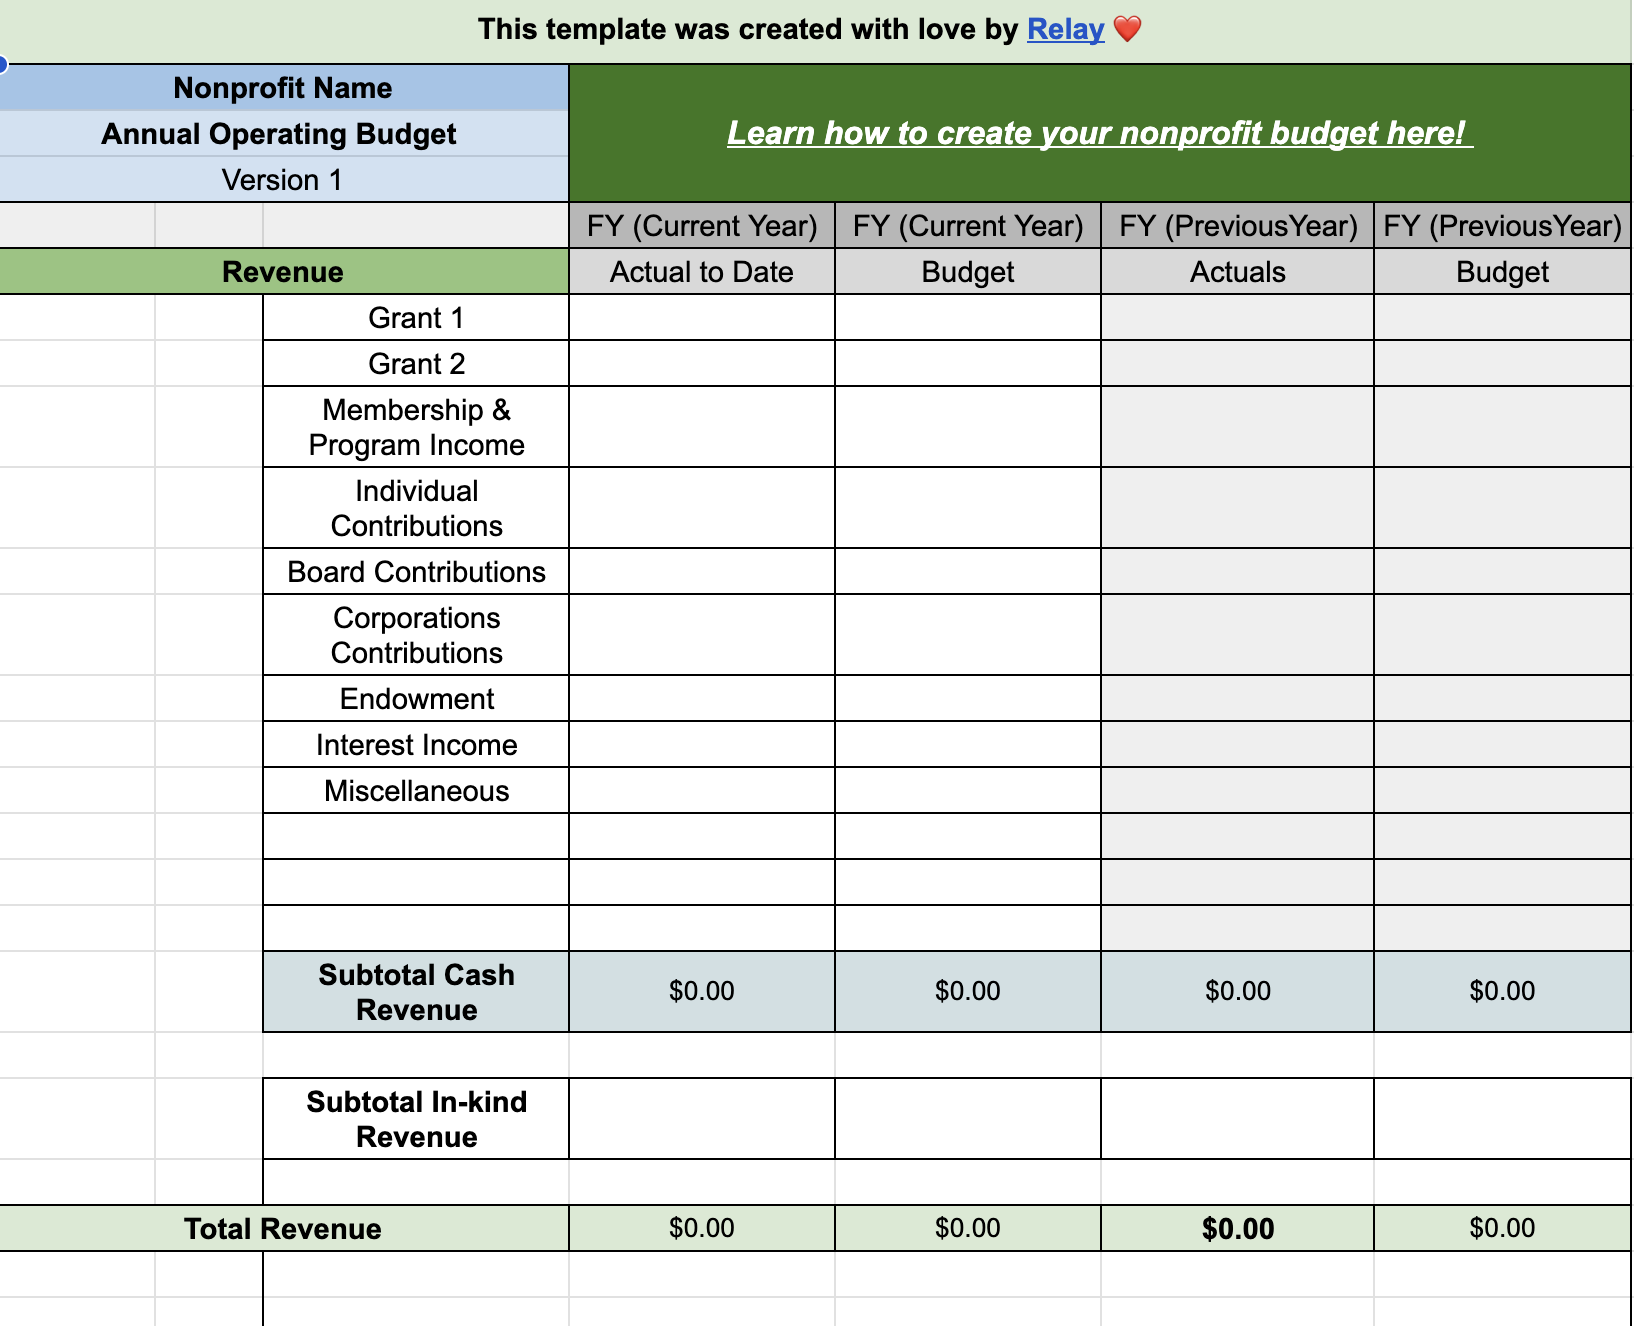 Nonprofit Budgeting - Budget Template - Relay